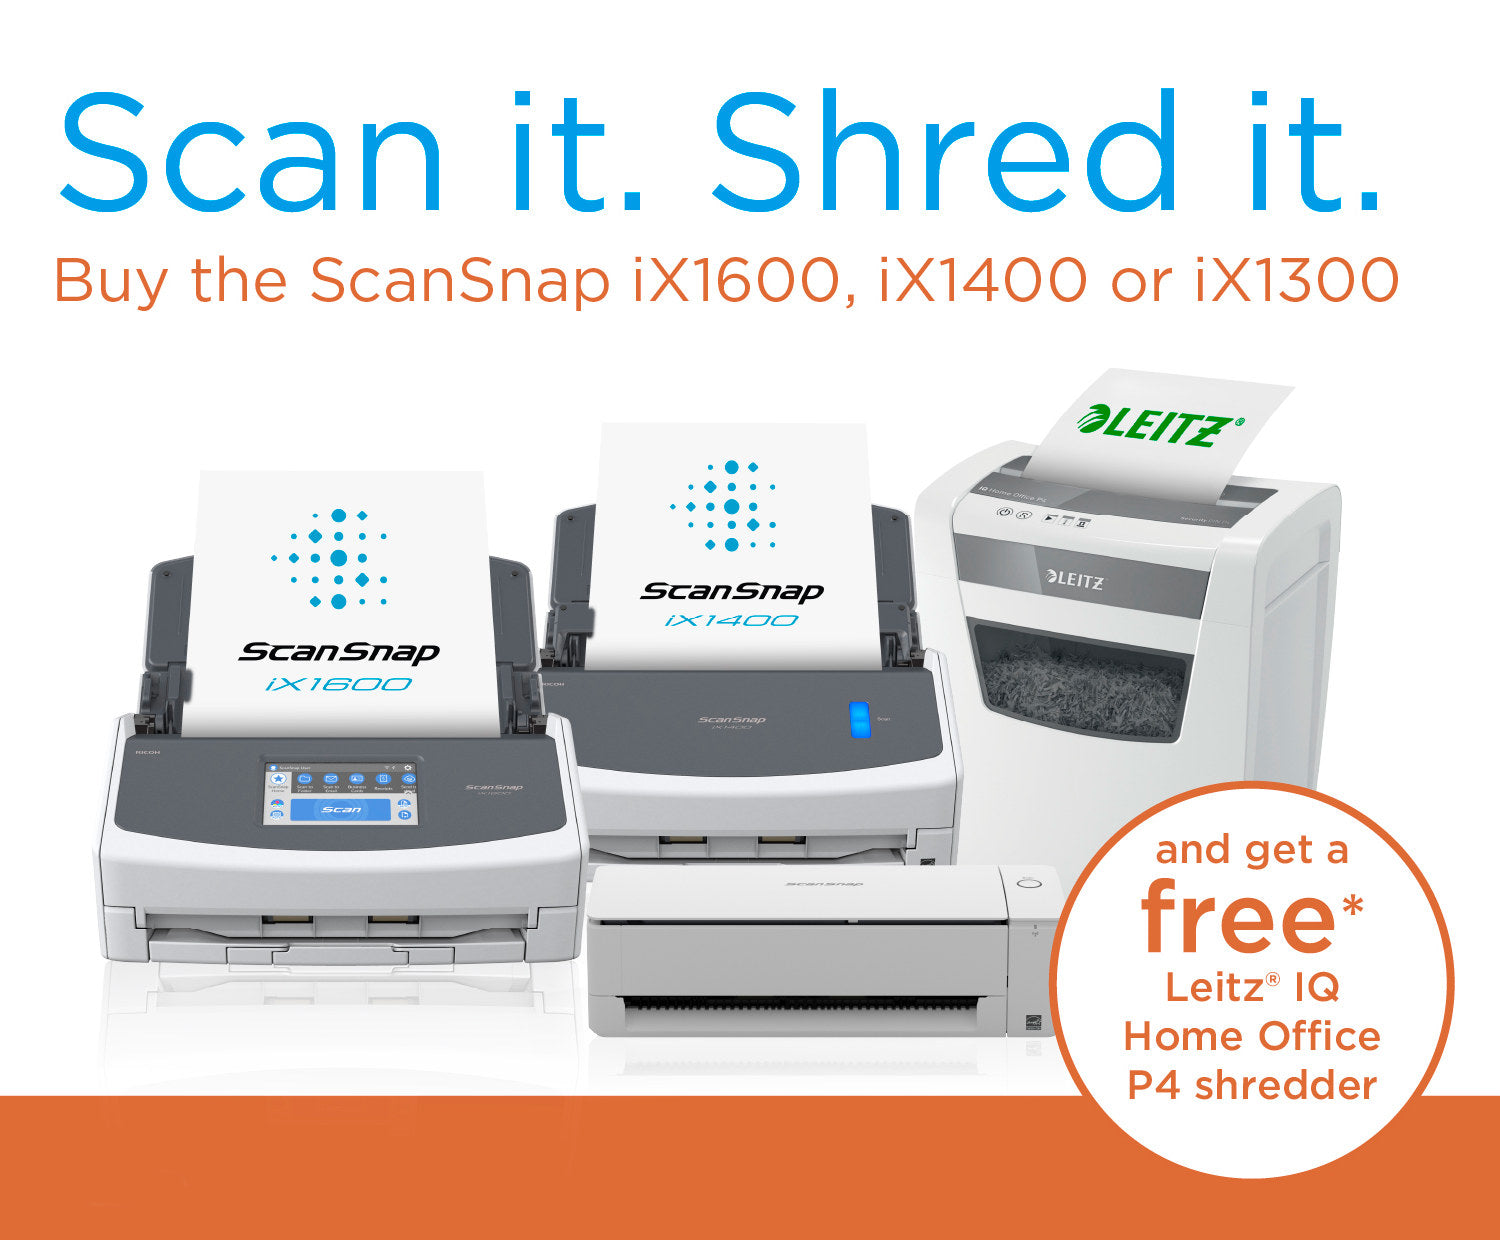 ScanSnap Scan It Shred it Promo